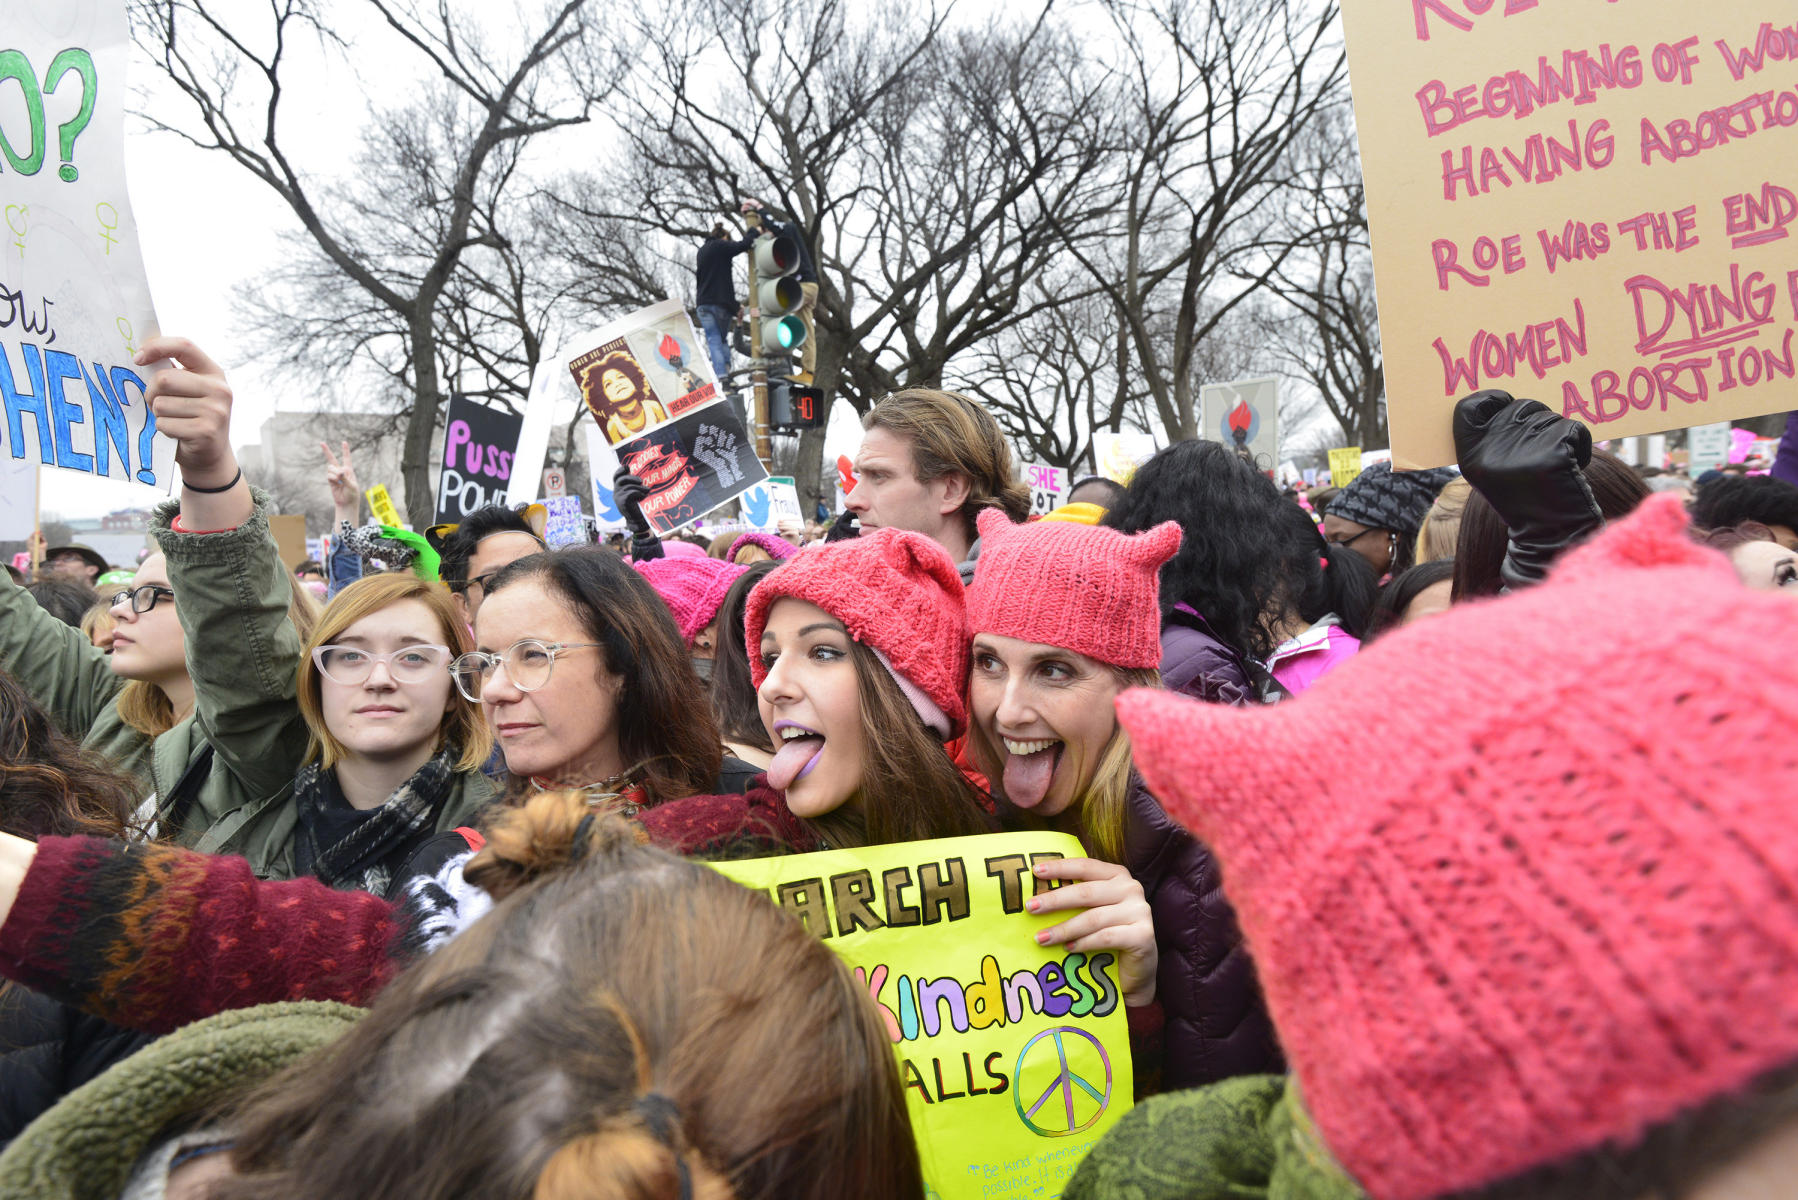 Pussy Hats - From the  Woman's March collection : Sample Series Images : Bruno Mahlmann Photography - Washington, DC Photographer